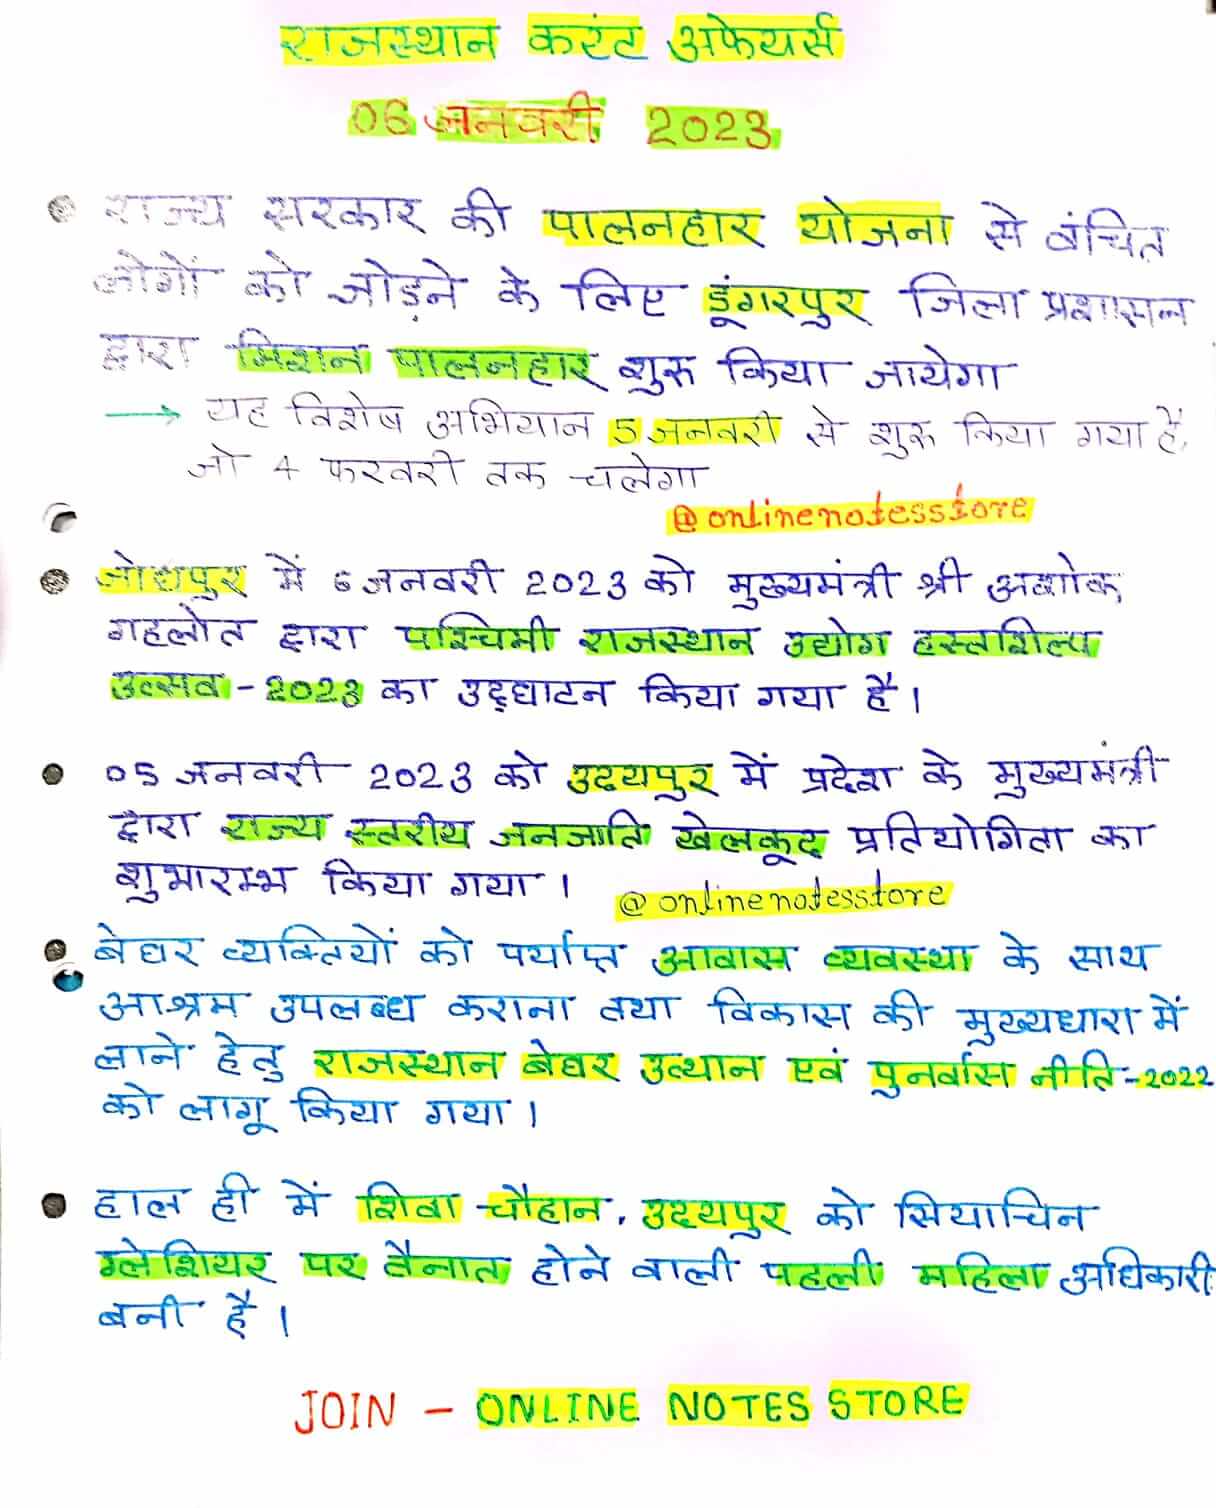 01-10 January 2023 Rajasthan Current Affairs in Hindi PDF |01-10 January 2023 करंट अफेयर्स | Rajasthan Current Affairs Quiz 01-10 January 2023 | Today Current Affairs 01-10 January 2023 | Current Affairs India - 01-10 January 2023 | Current Affairs in Hindi | Today Current Affairs Questions PDF | Current Affairs - Online Notes Store | Rajasthan Current Affairs - 2022